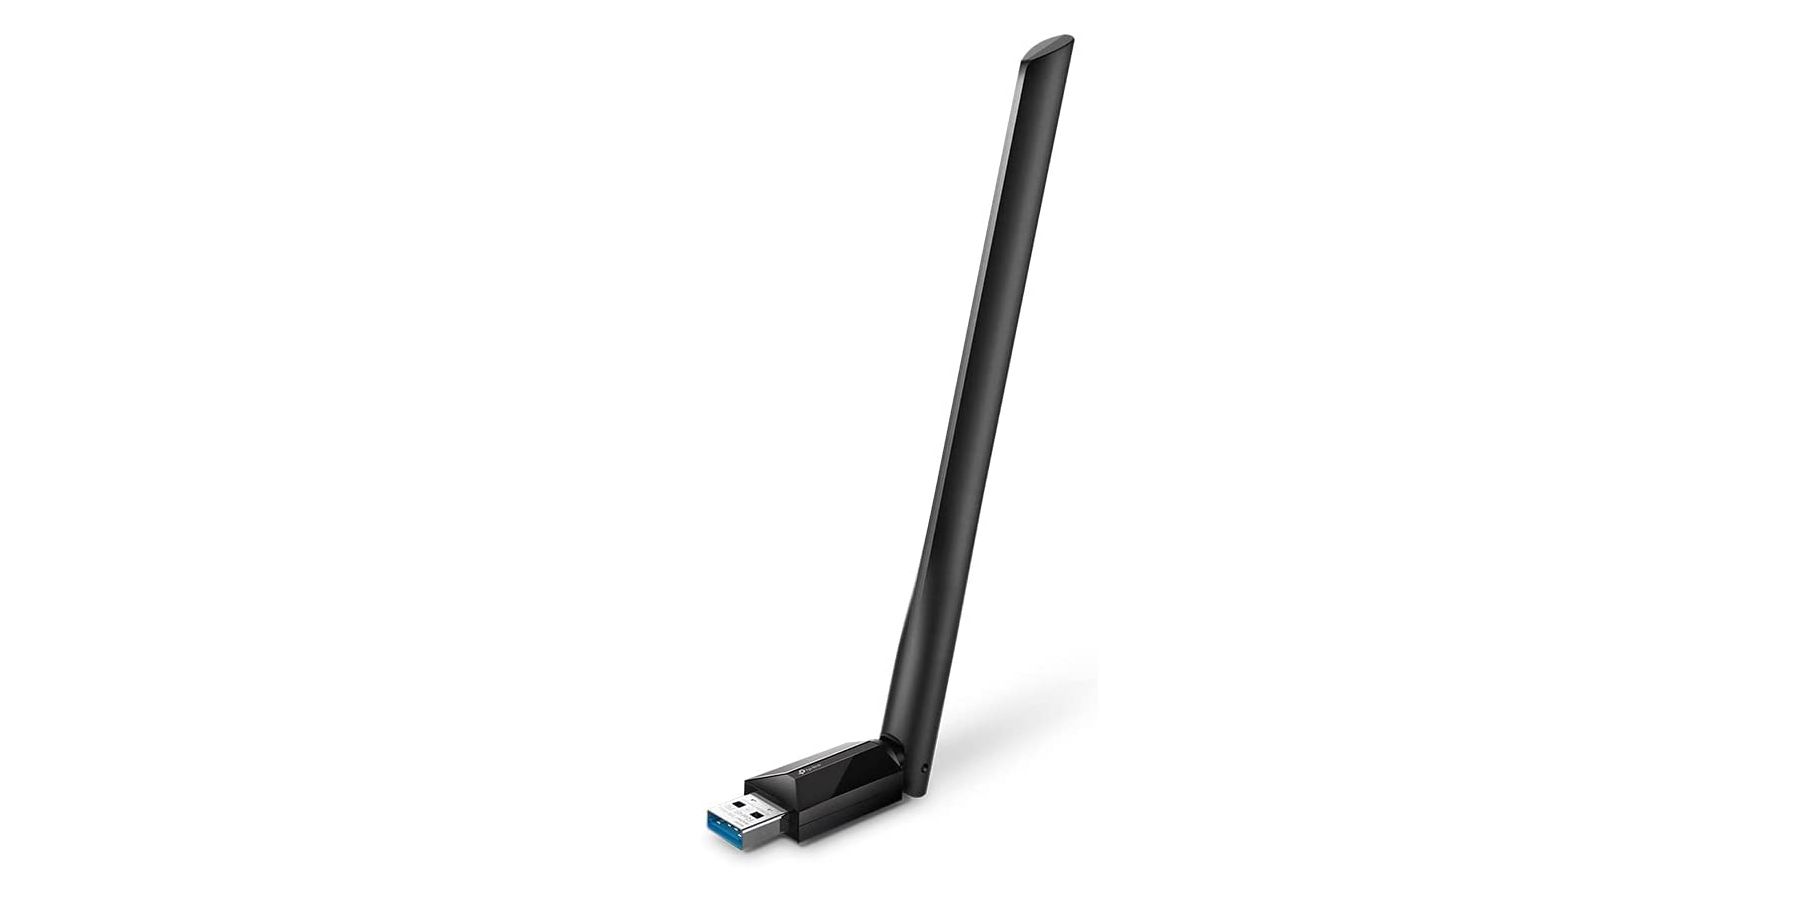 TP-Link USB WiFi Adapter for Desktop PC, AC1300Mbps USB 3.0 WiFi Dual Band